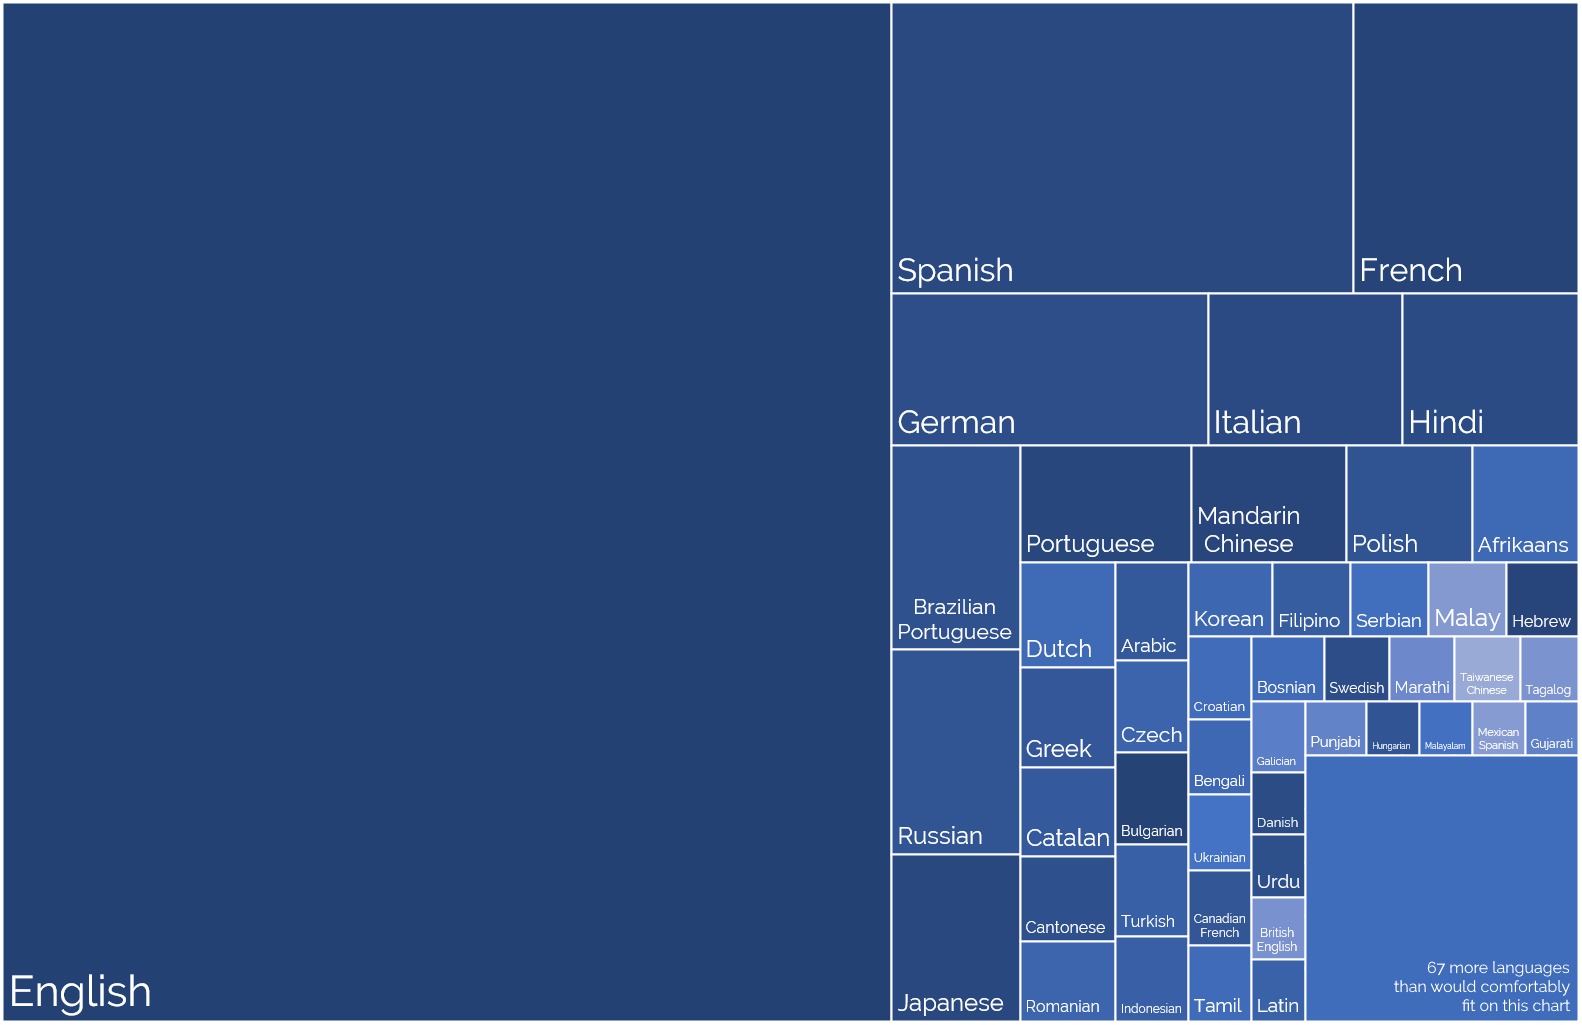 Treemap showing languages spoken by Automatticians: English dominates, followed by Spanish, French, German, Italian, Hindi, Portugese, Mandarin, Russian, Japanese, Polish, Afrikaans, Dutch, Green, Catalan, Cantonese, Romanian, and many others.